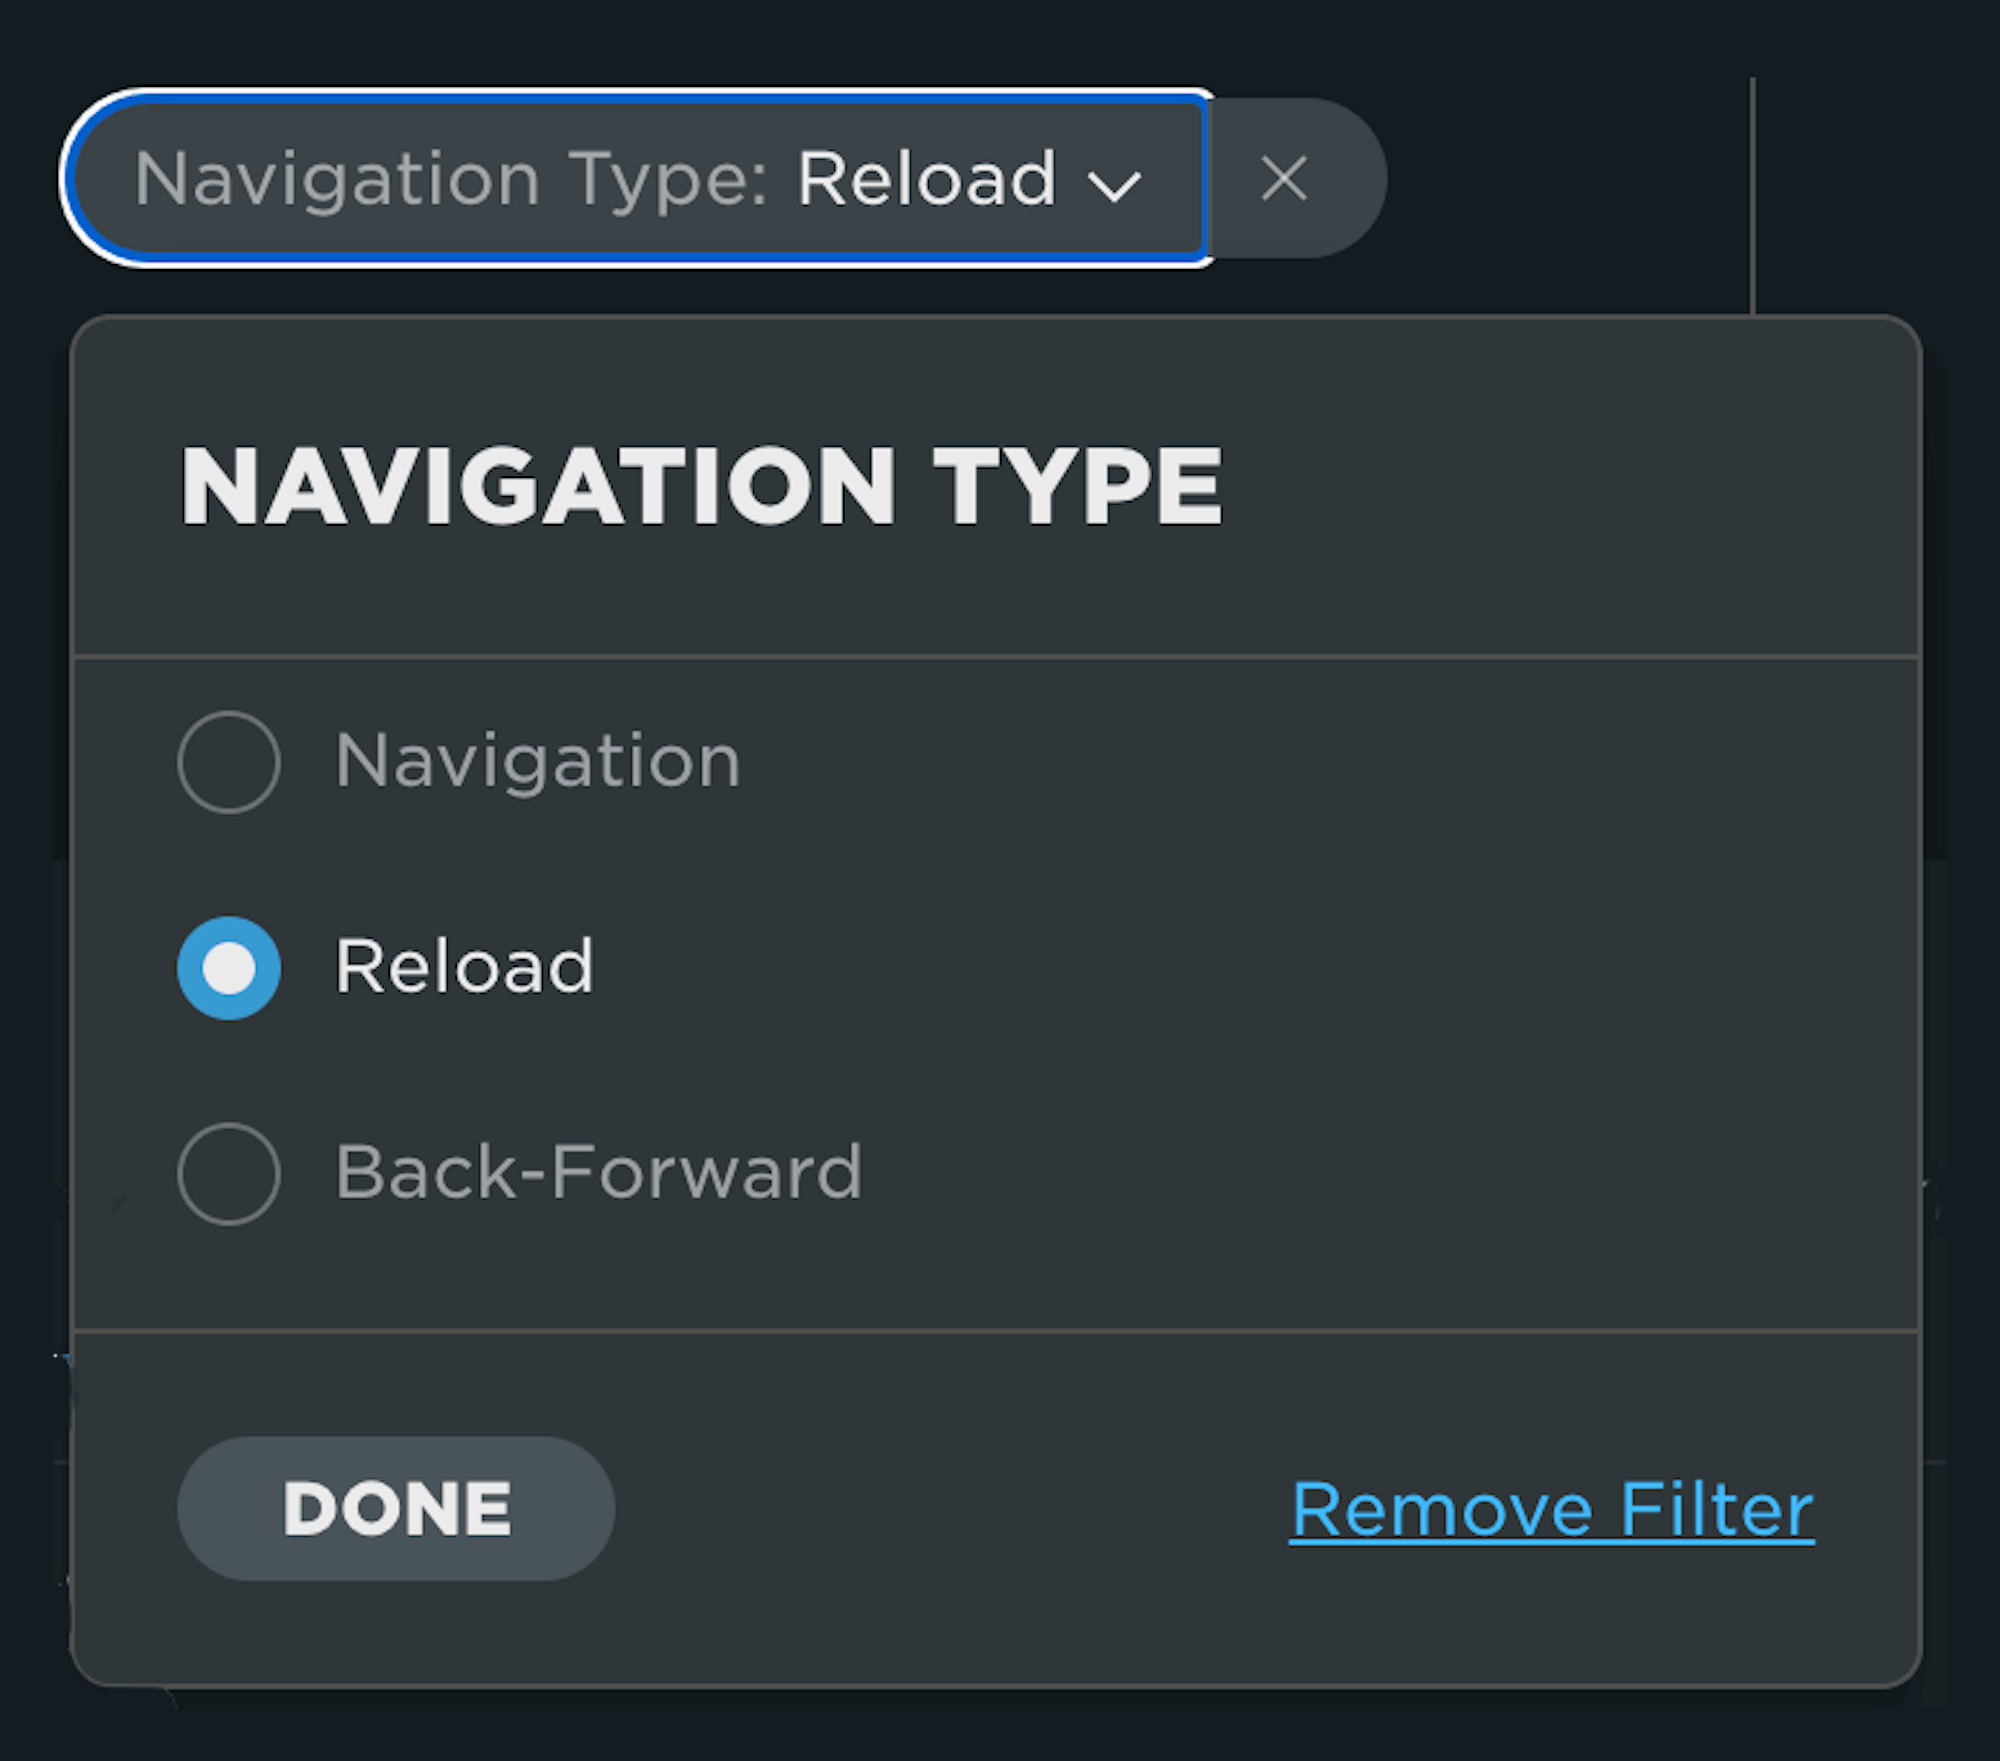 Filter showing navigation types in dropdown